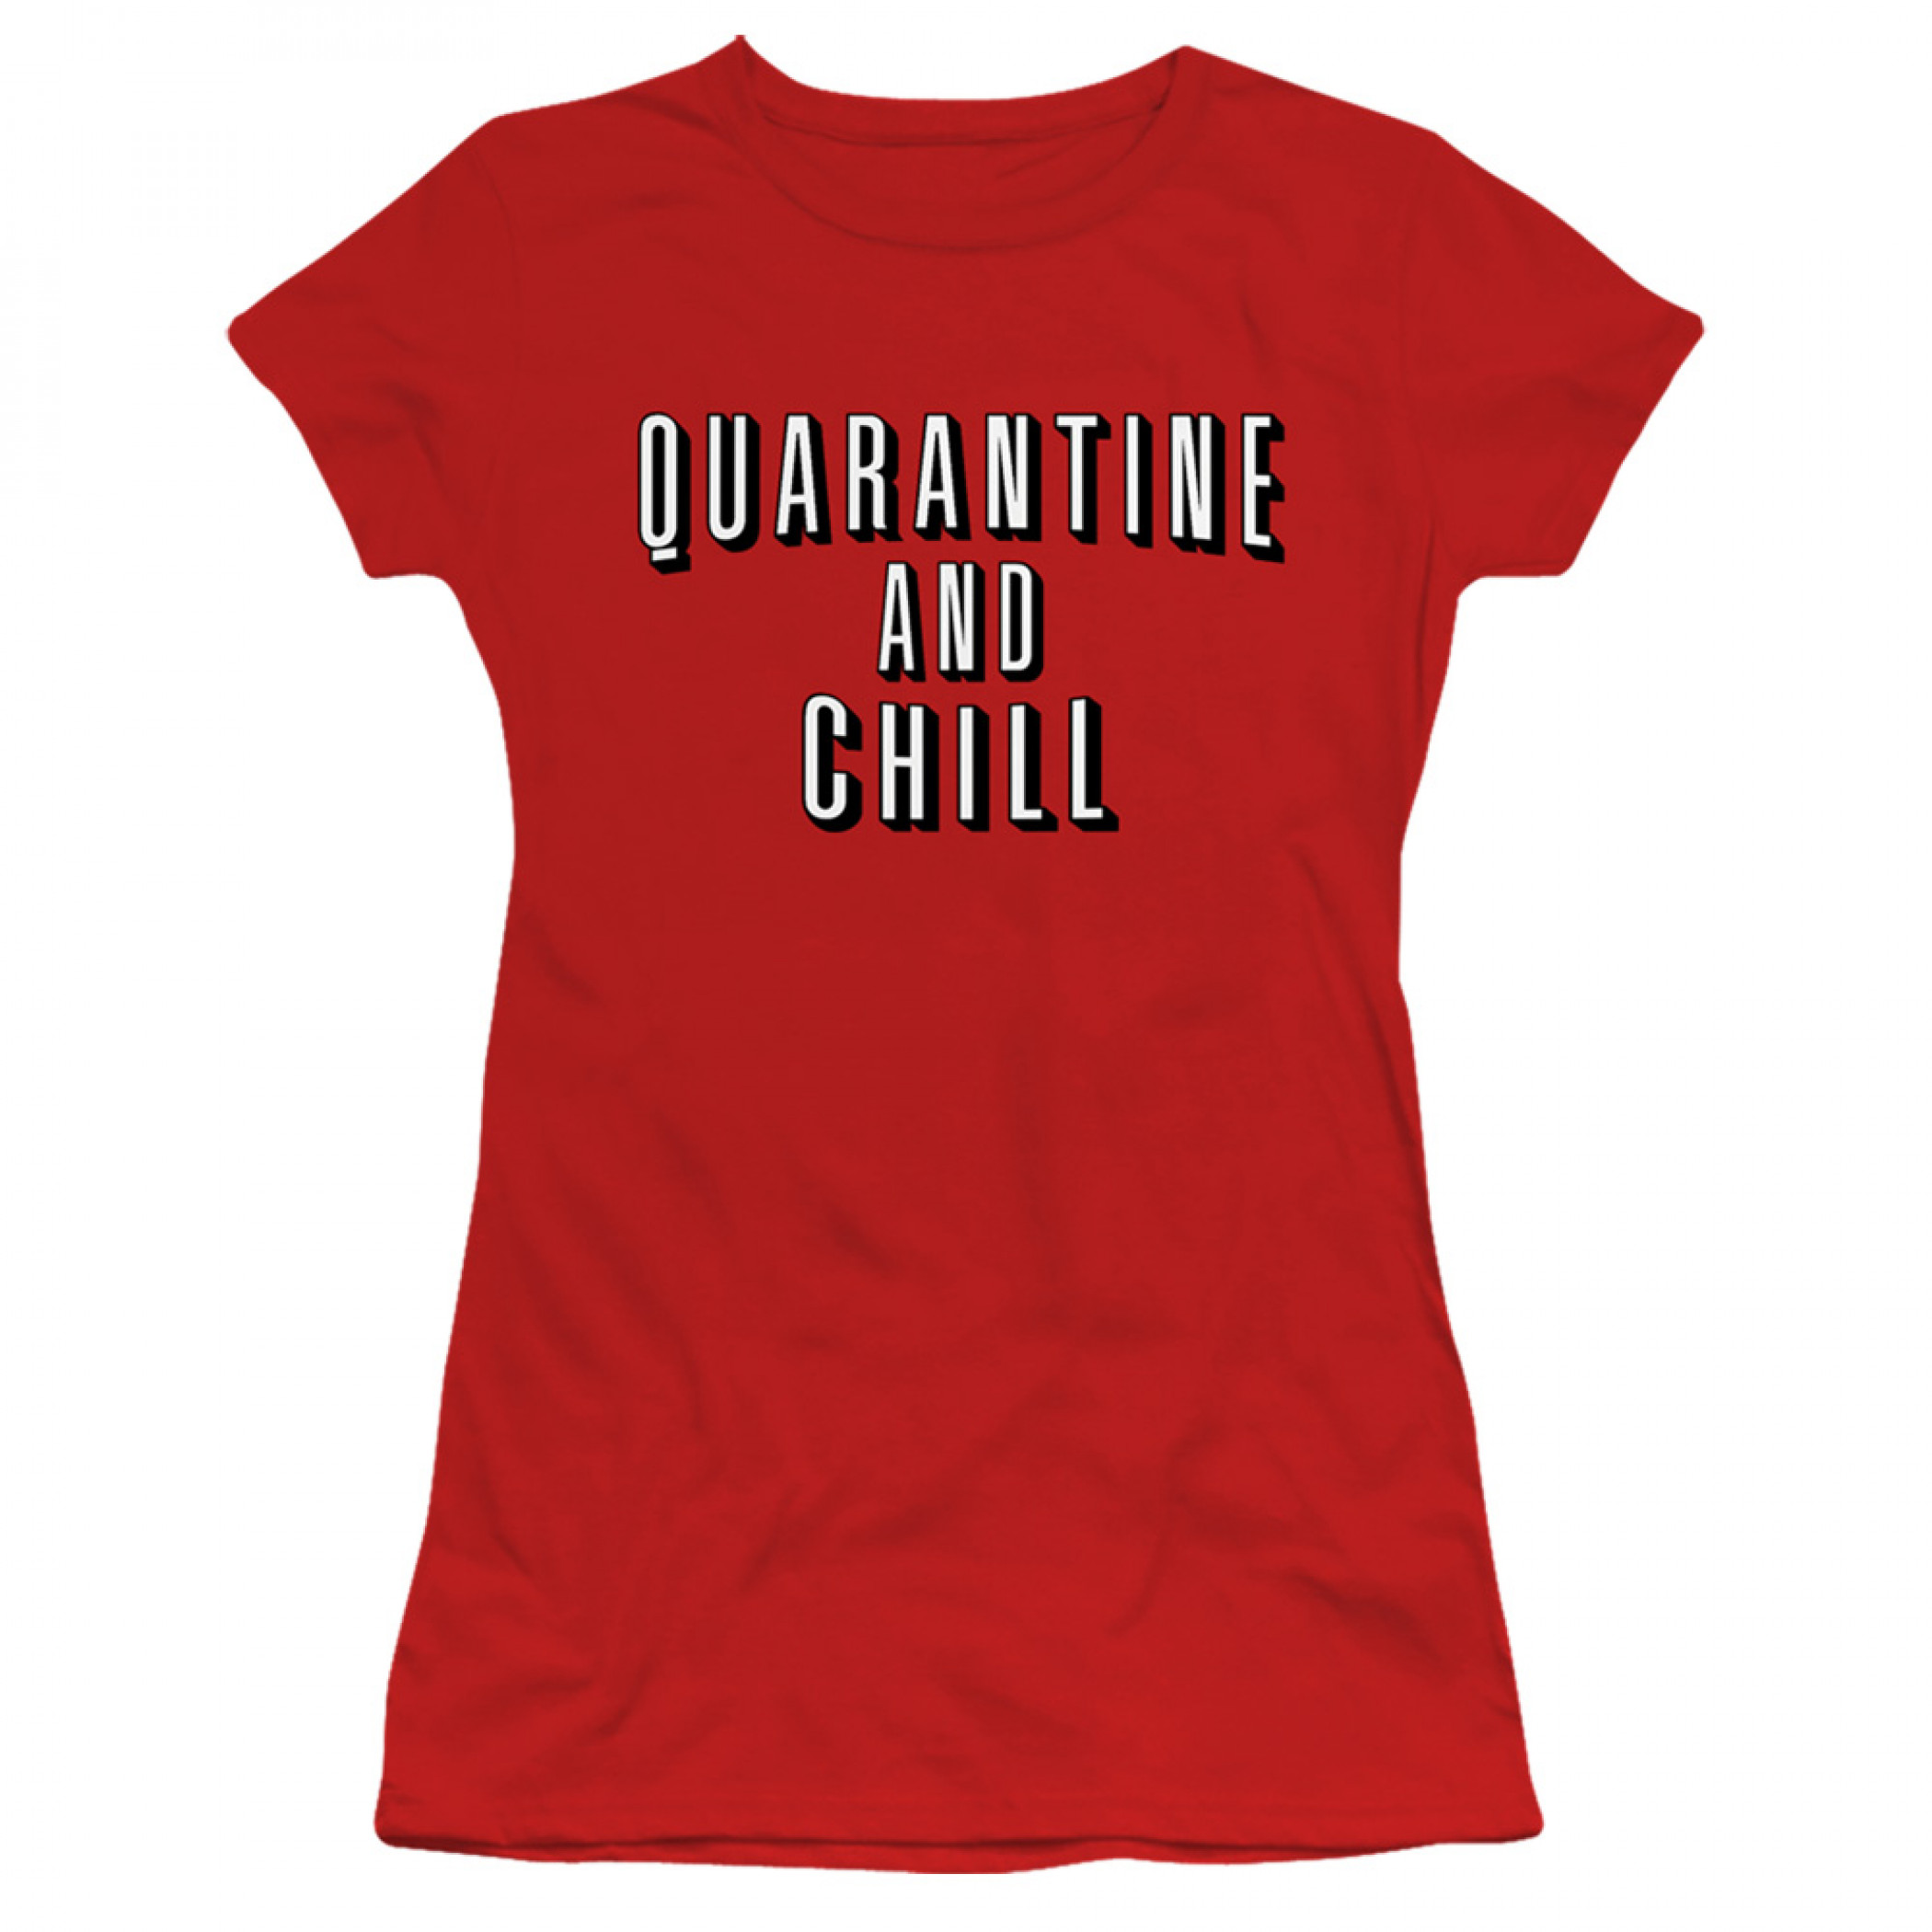 Quarantine and Chill Social Distancing Women's T-Shirt